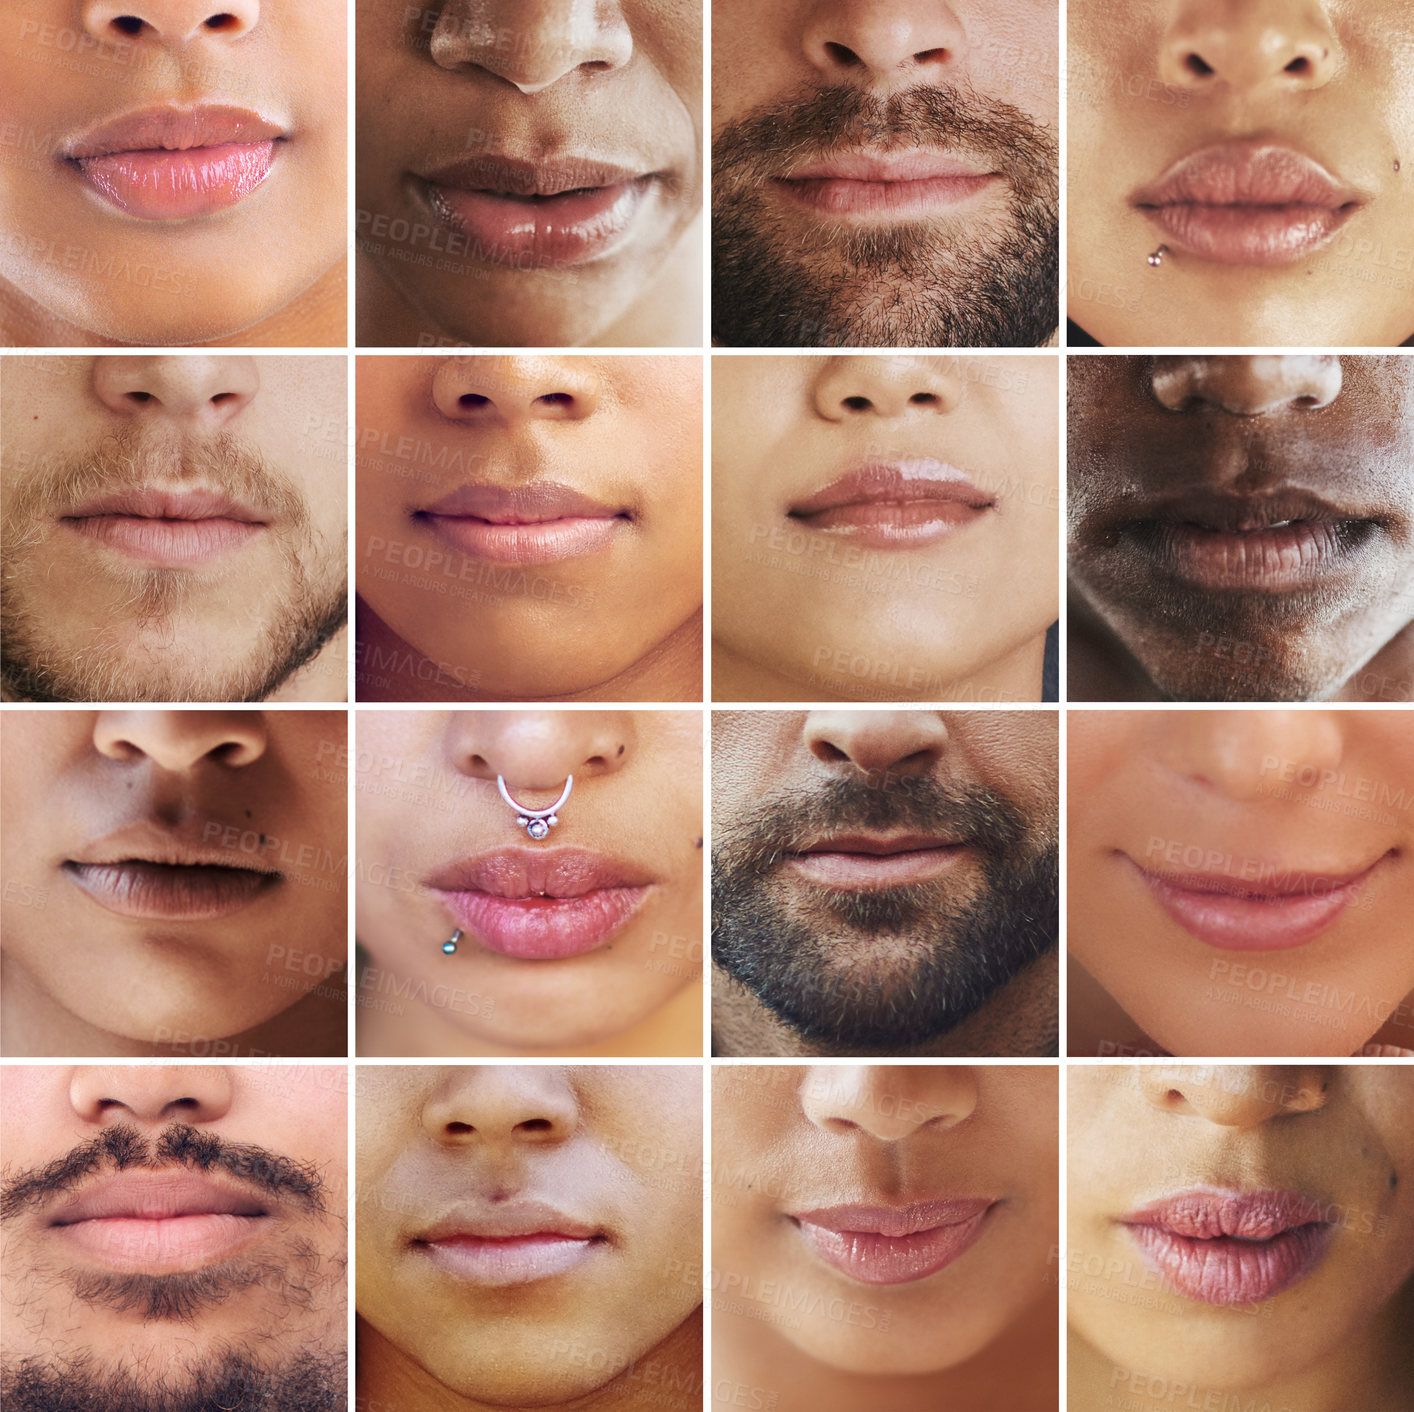 Buy stock photo Composite image of an assortment of people’s mouths